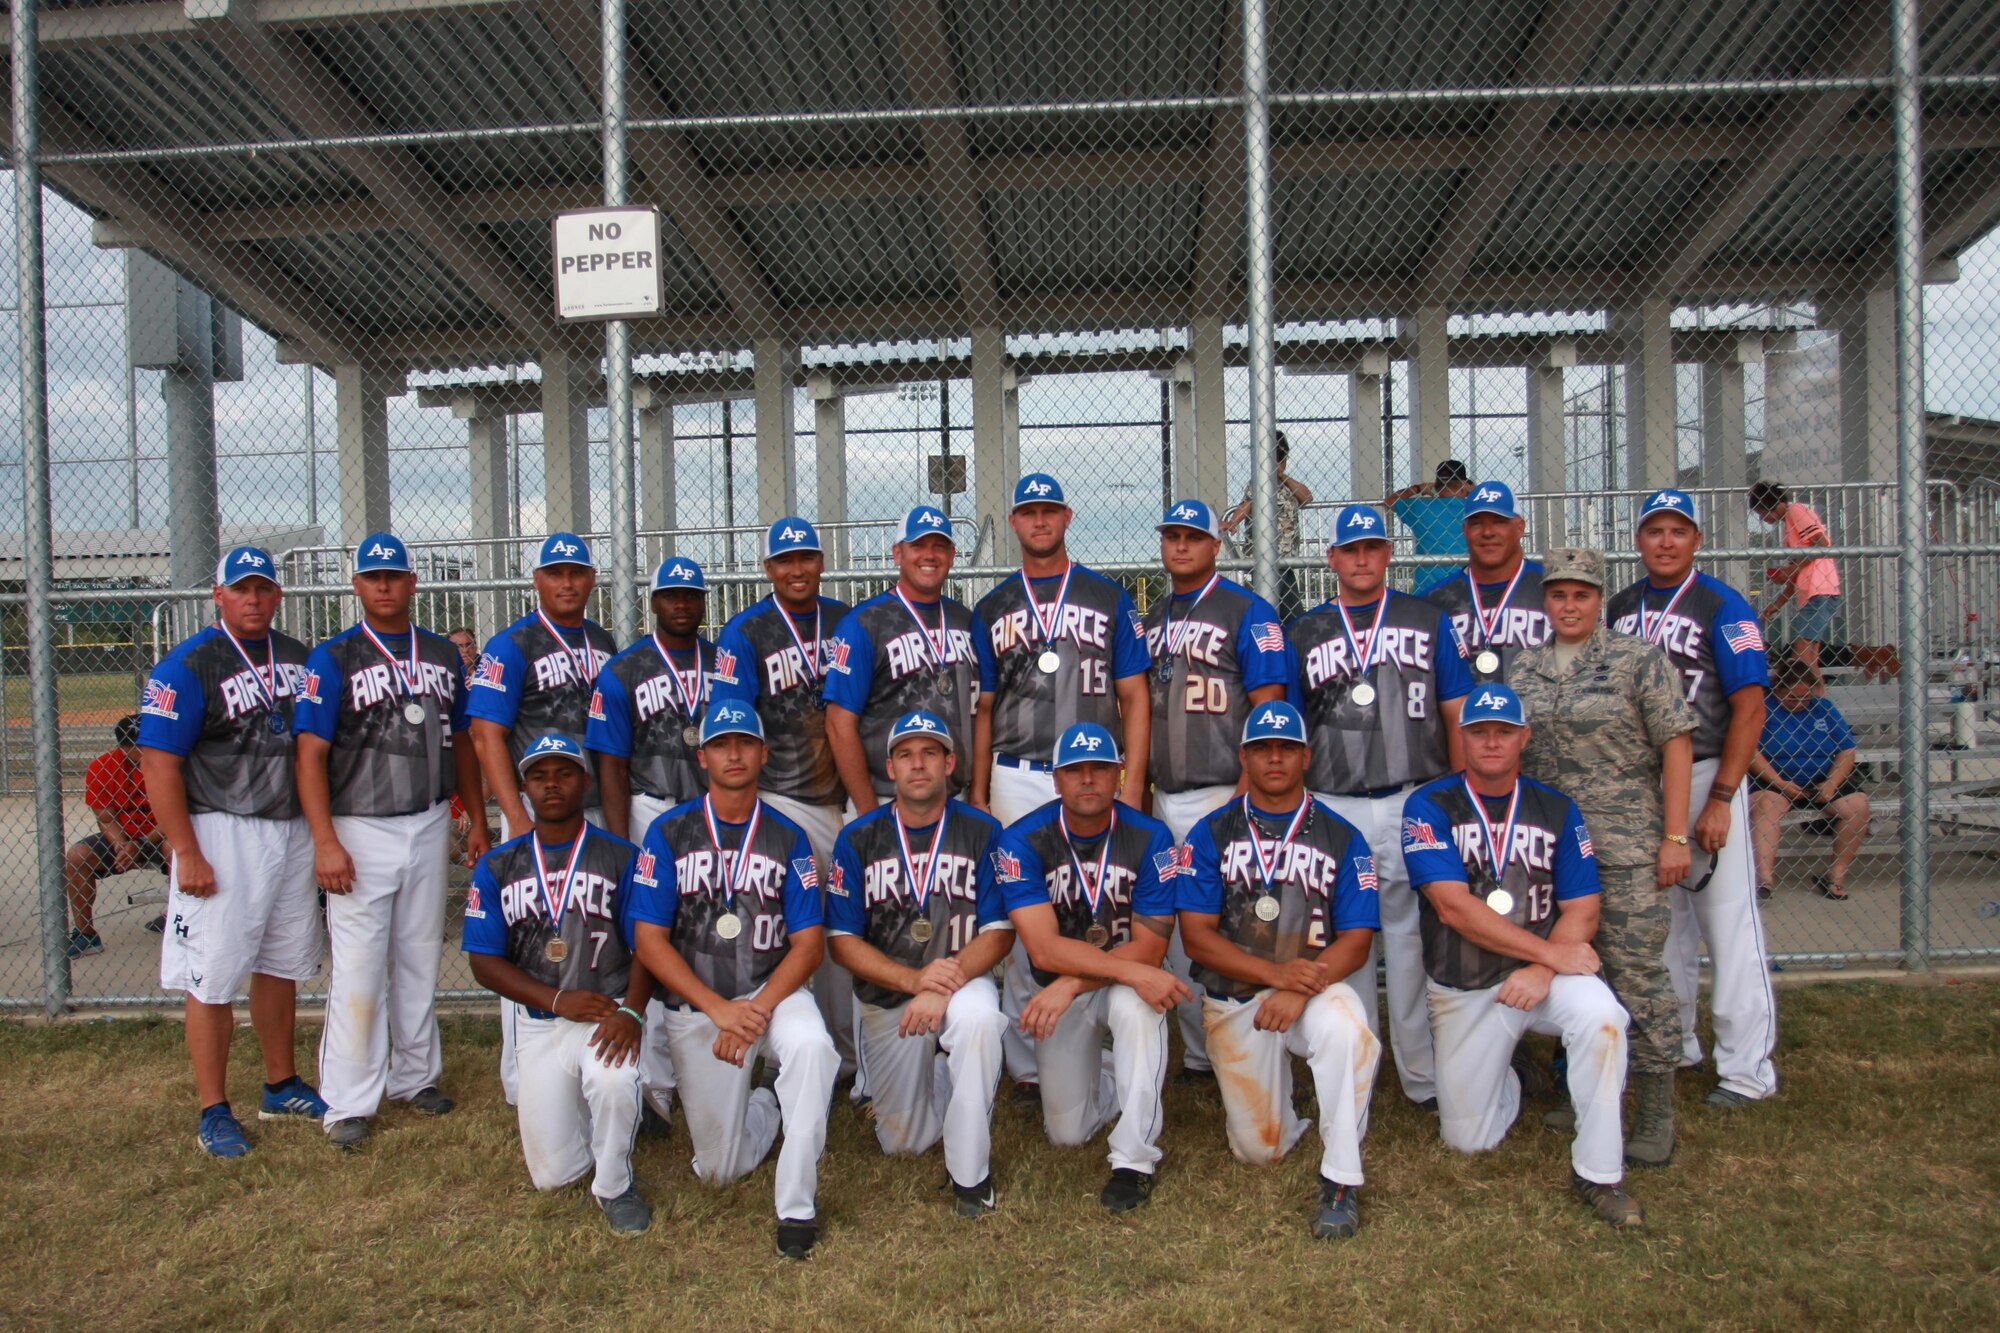 The All-Air Force Men’s Softball Team earned the silver medal in the Armed Forces Men’s Softball Tournament at JBSA-Fort Sam Houston’s Pershing Ballpark on Sept. 22. With the team is Brig. Gen. Linda Hurry. (U.S. Air Force photo by Steve Brown)